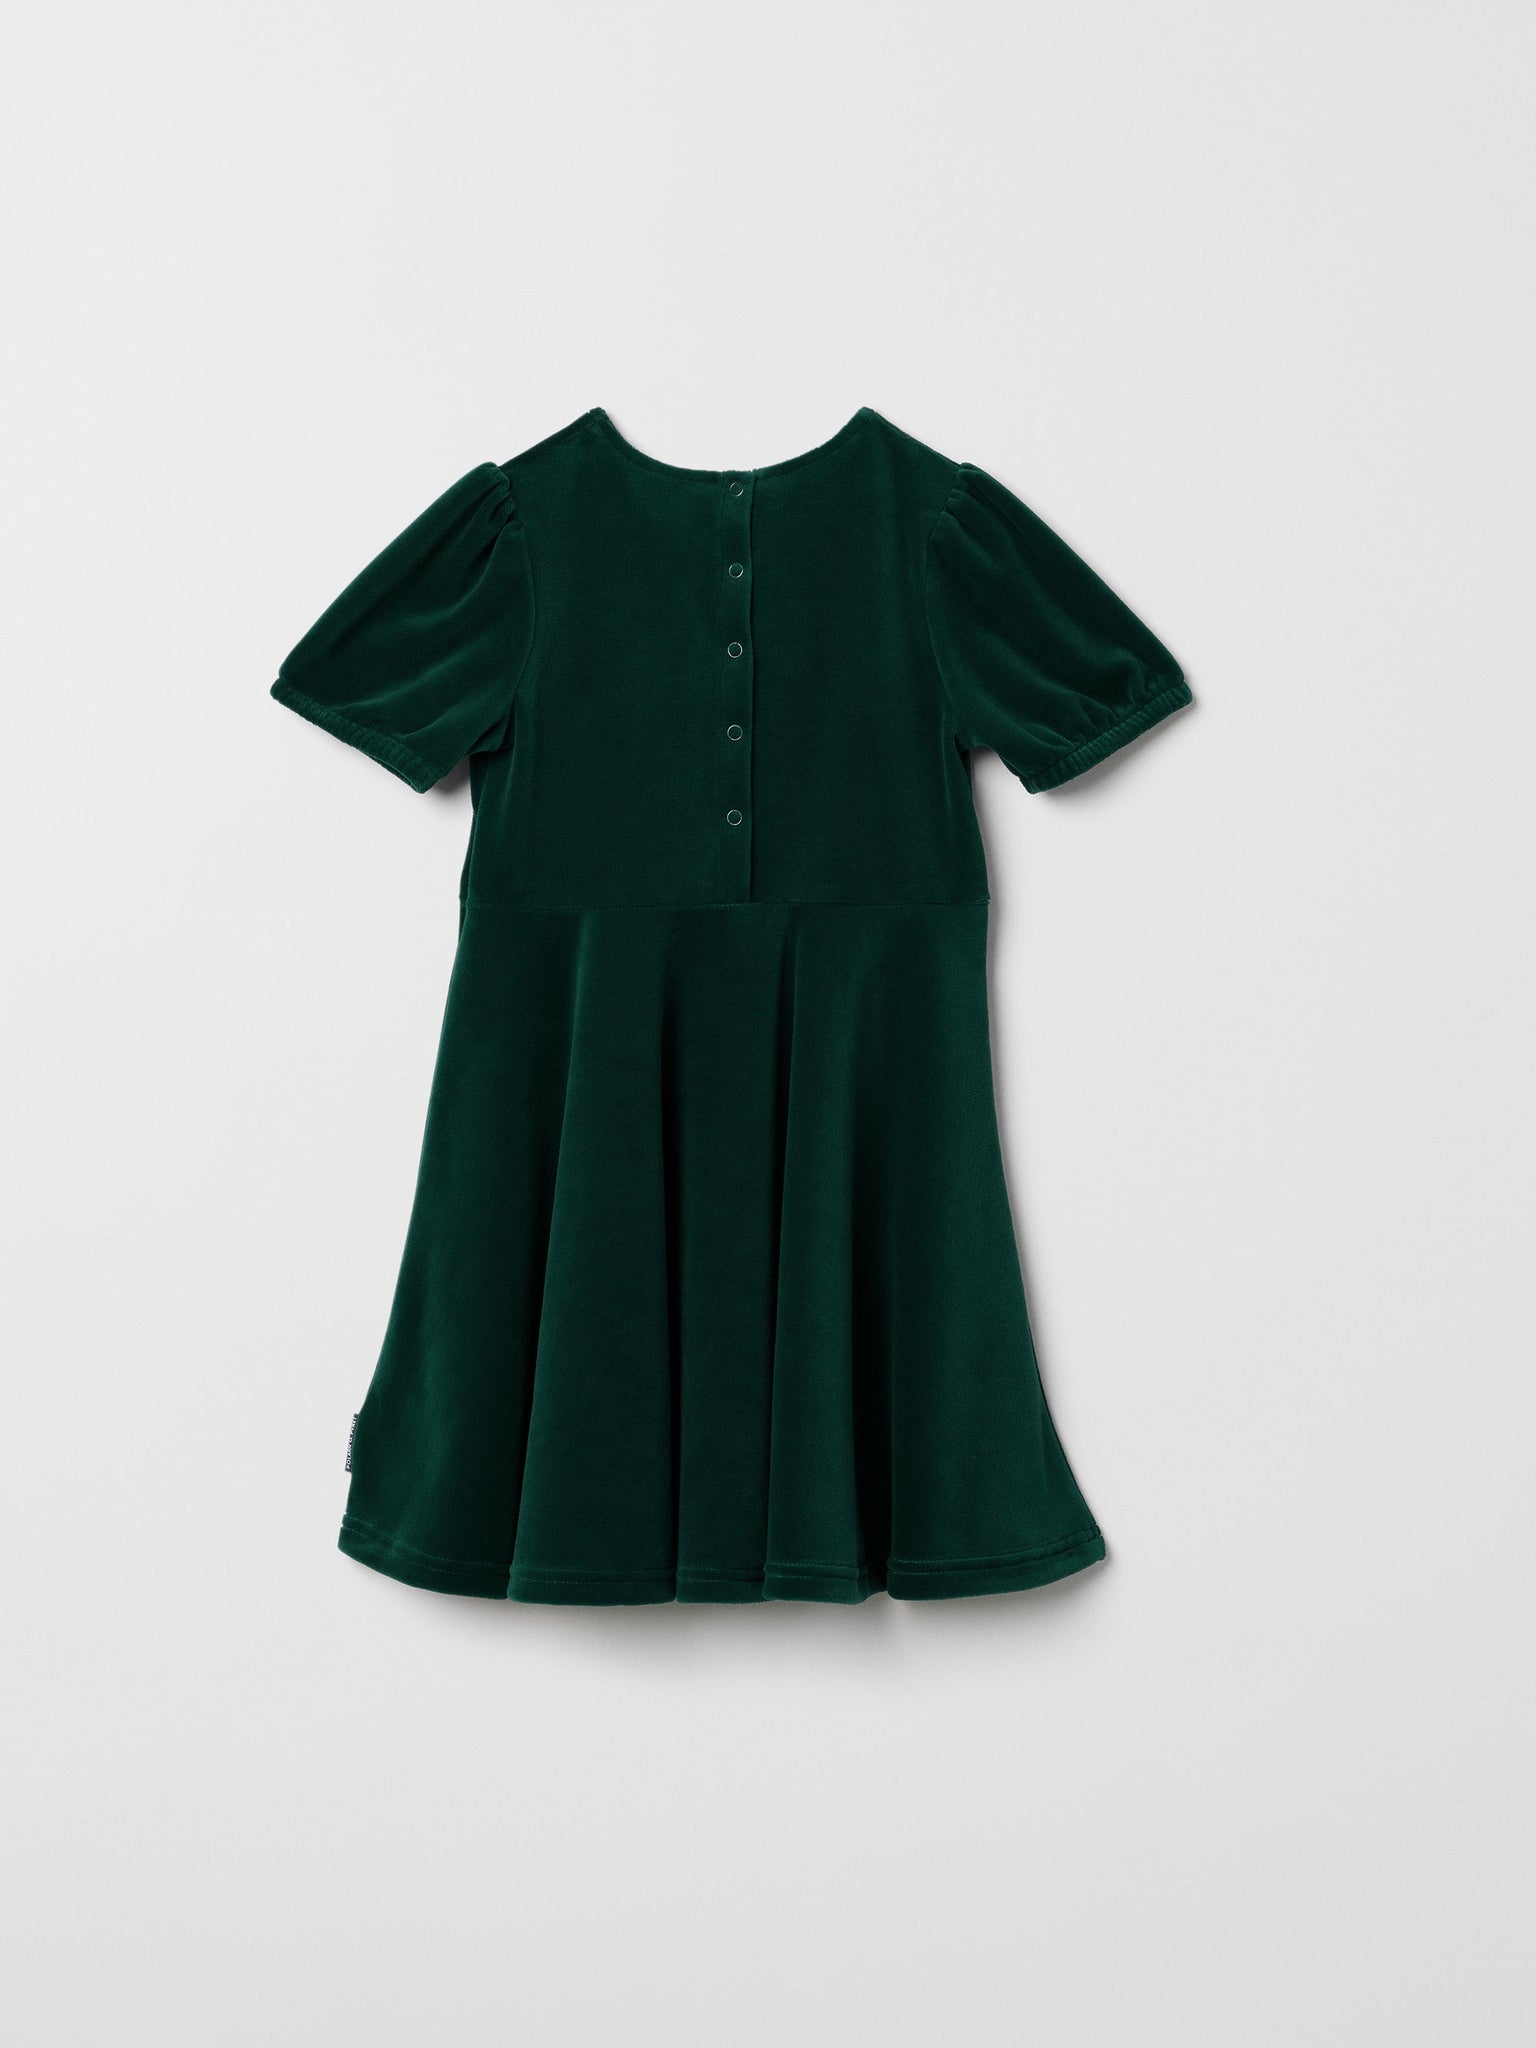 Green Velour Kids Dress from the Polarn O. Pyret kidswear collection. Clothes made using sustainably sourced materials.